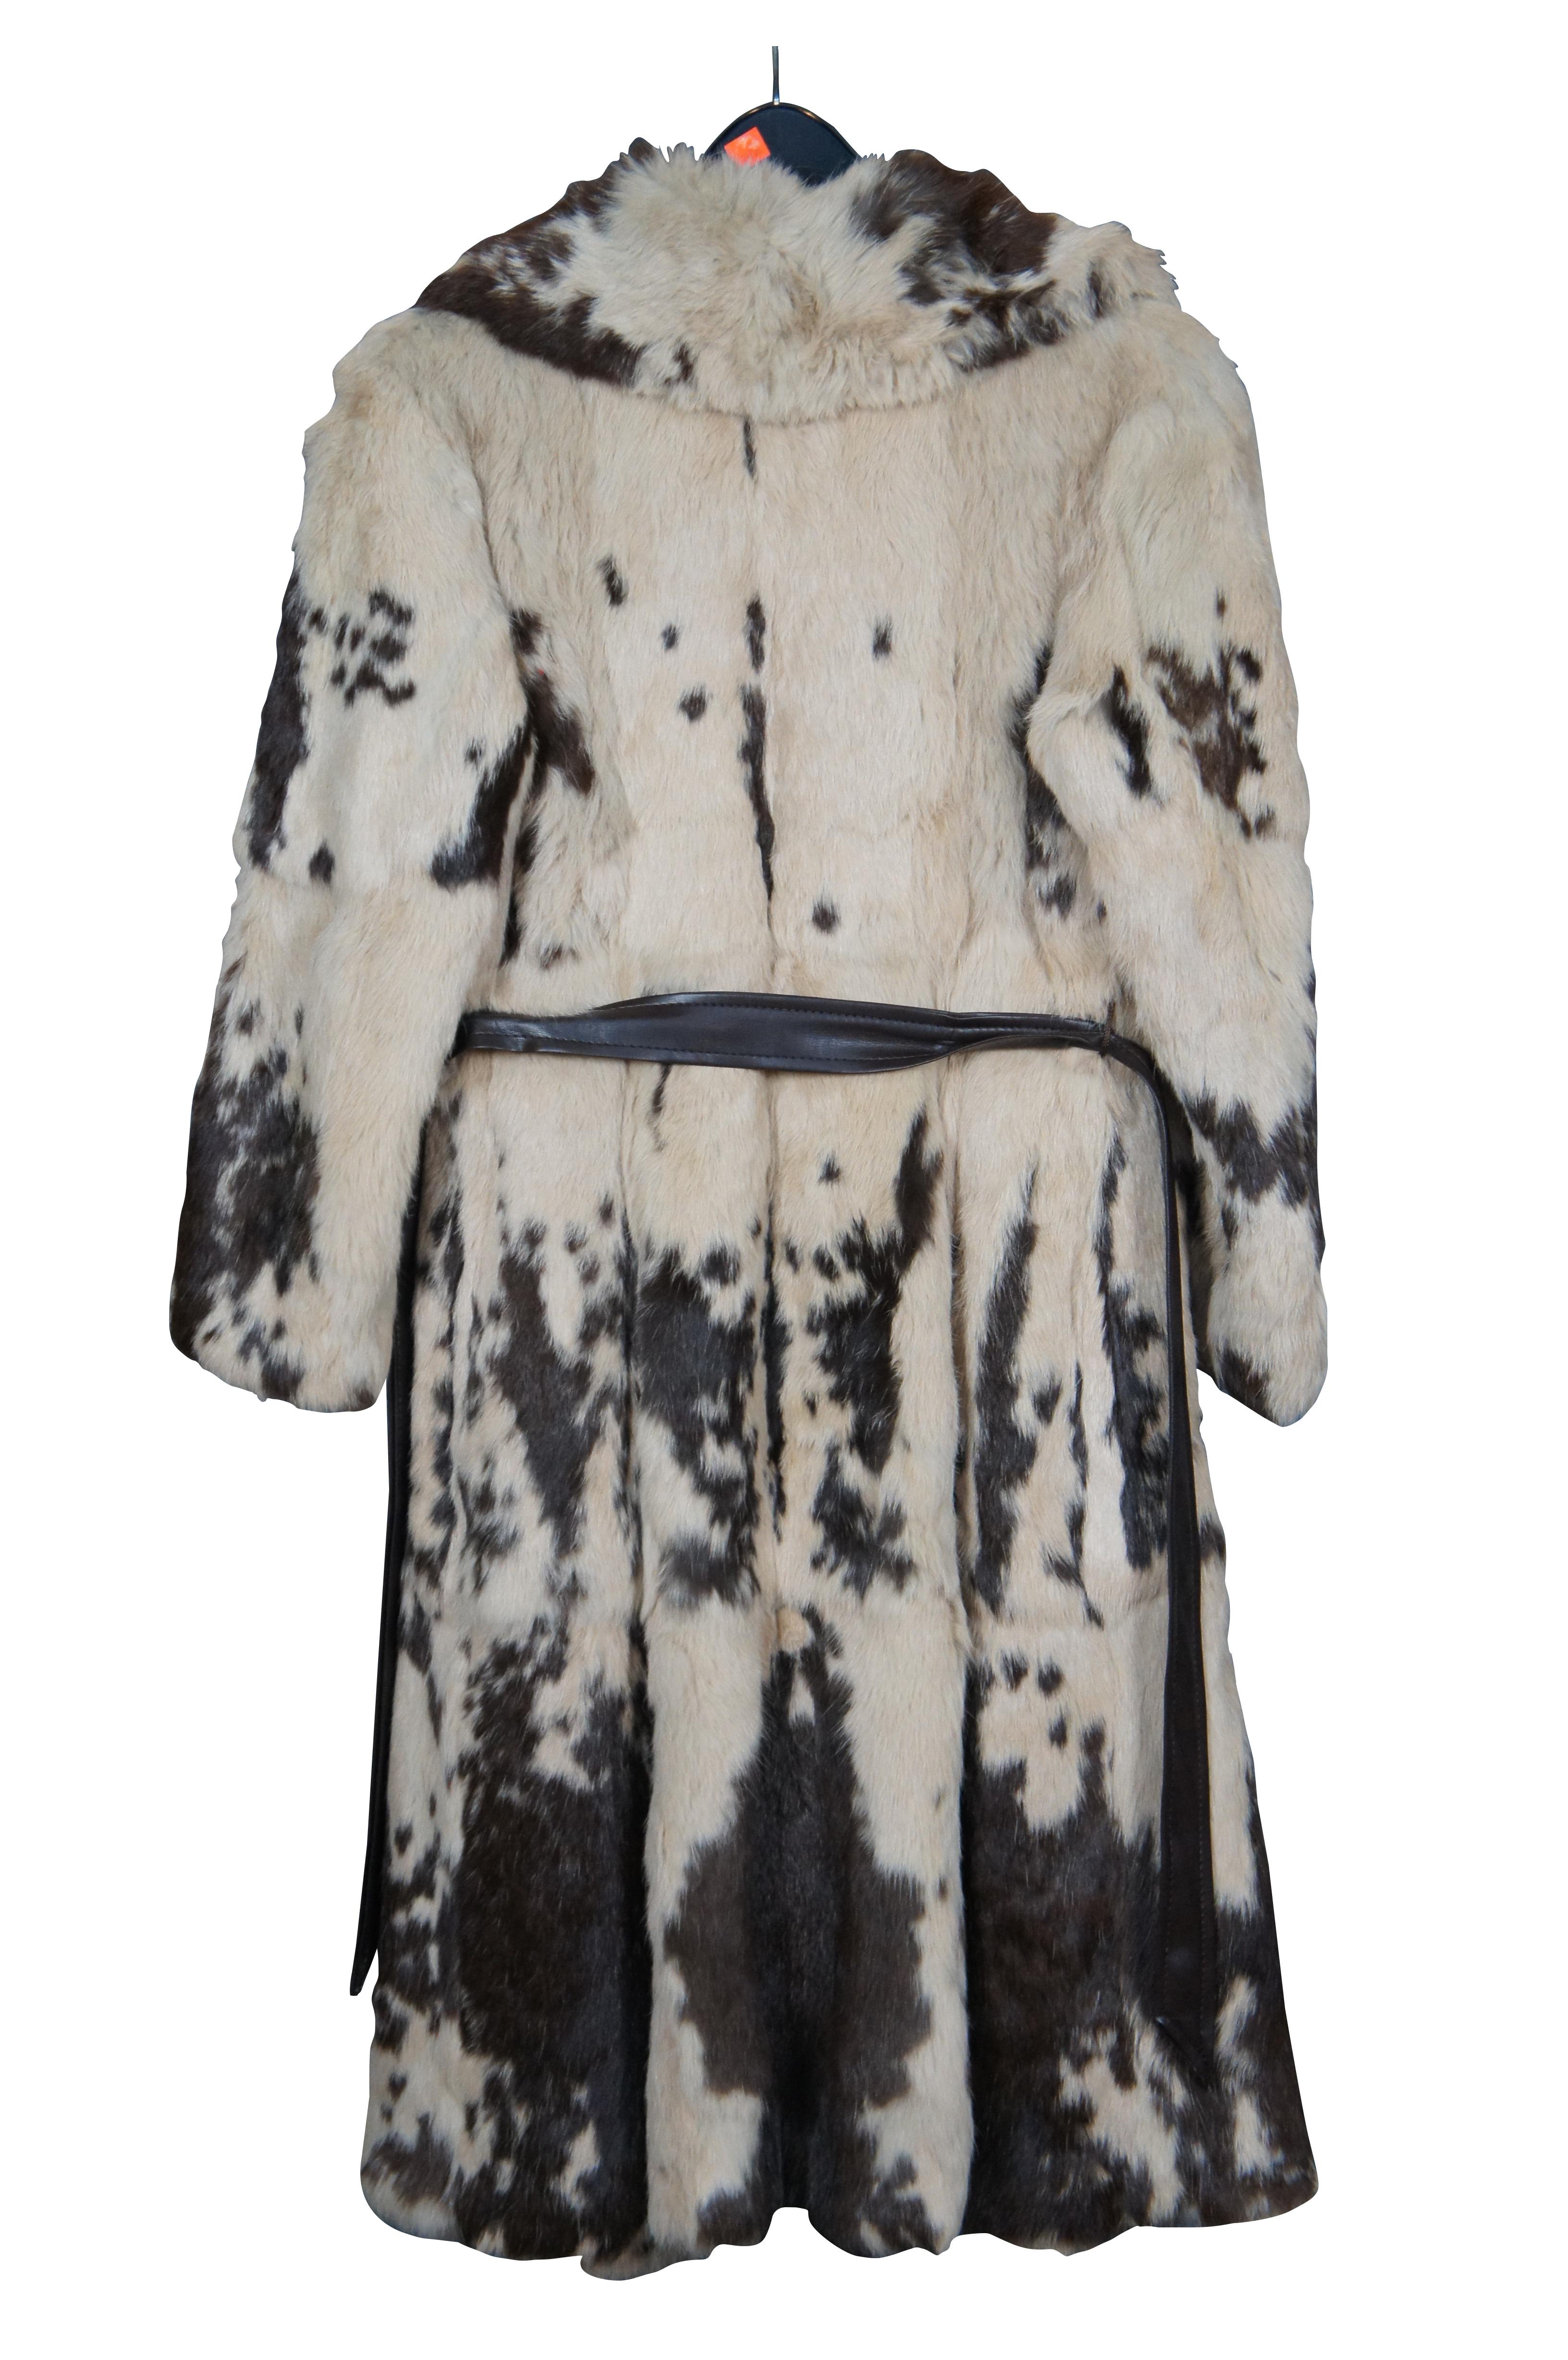 Vtg Korean Full Length Brown & White Angus Cowhide Fur Coat Womens Jacket In Good Condition For Sale In Dayton, OH